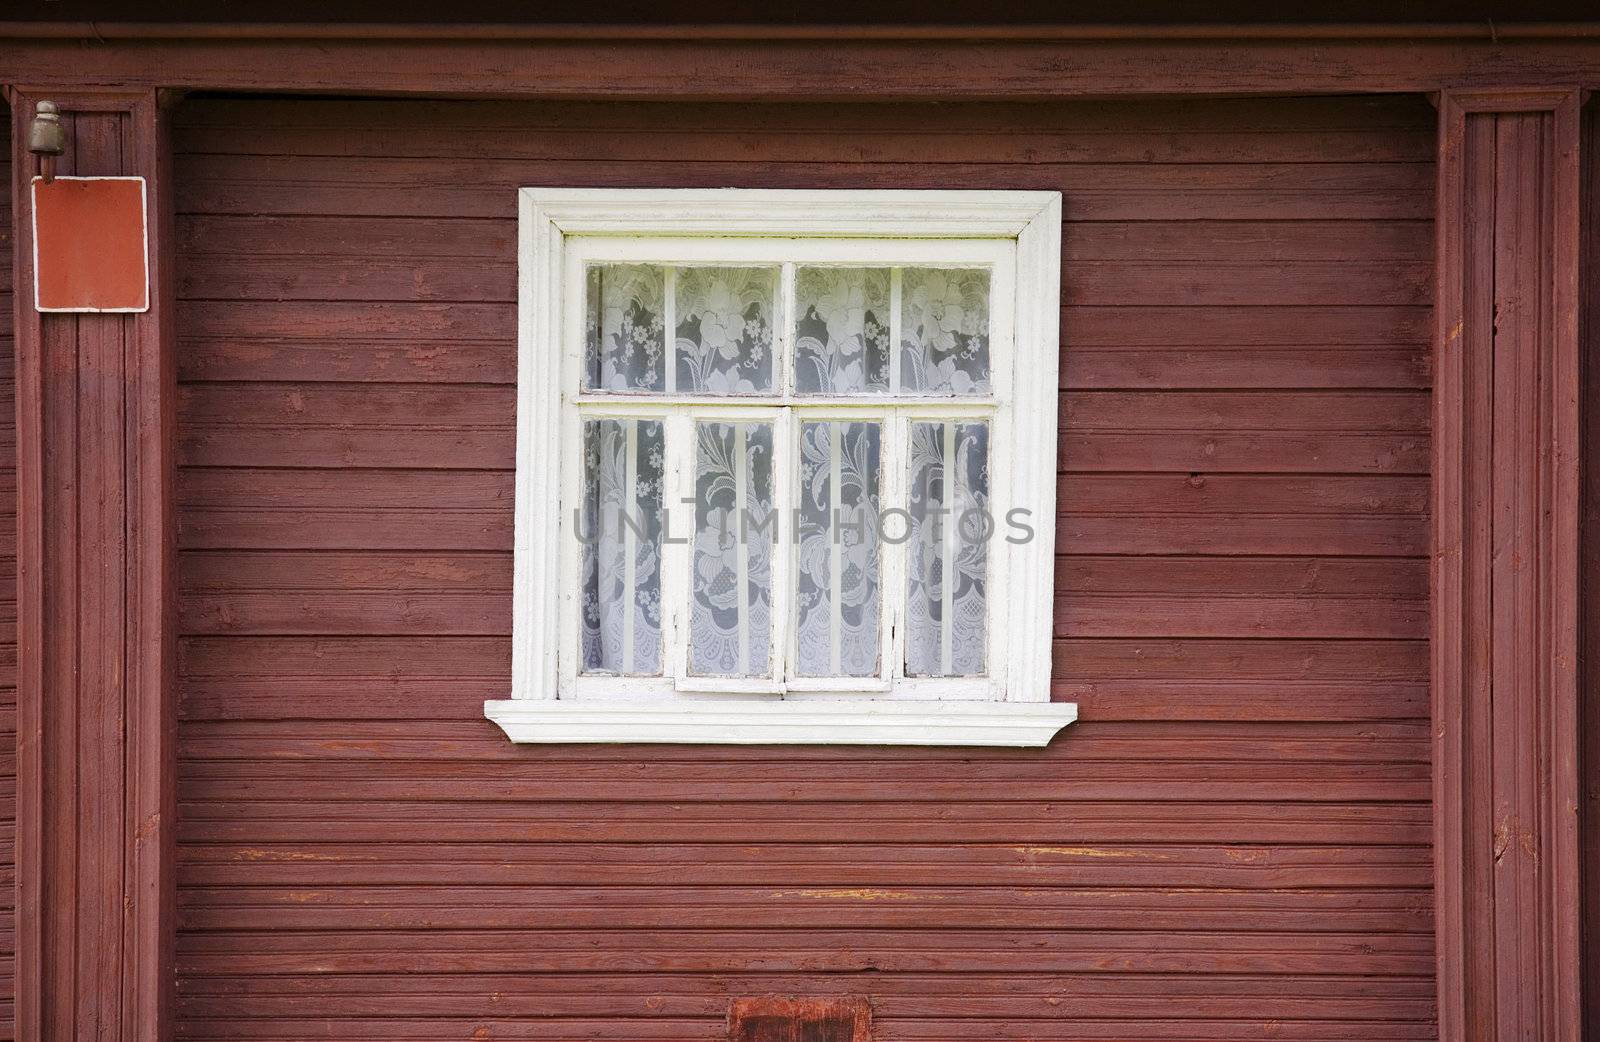 The window of old wooden rural house